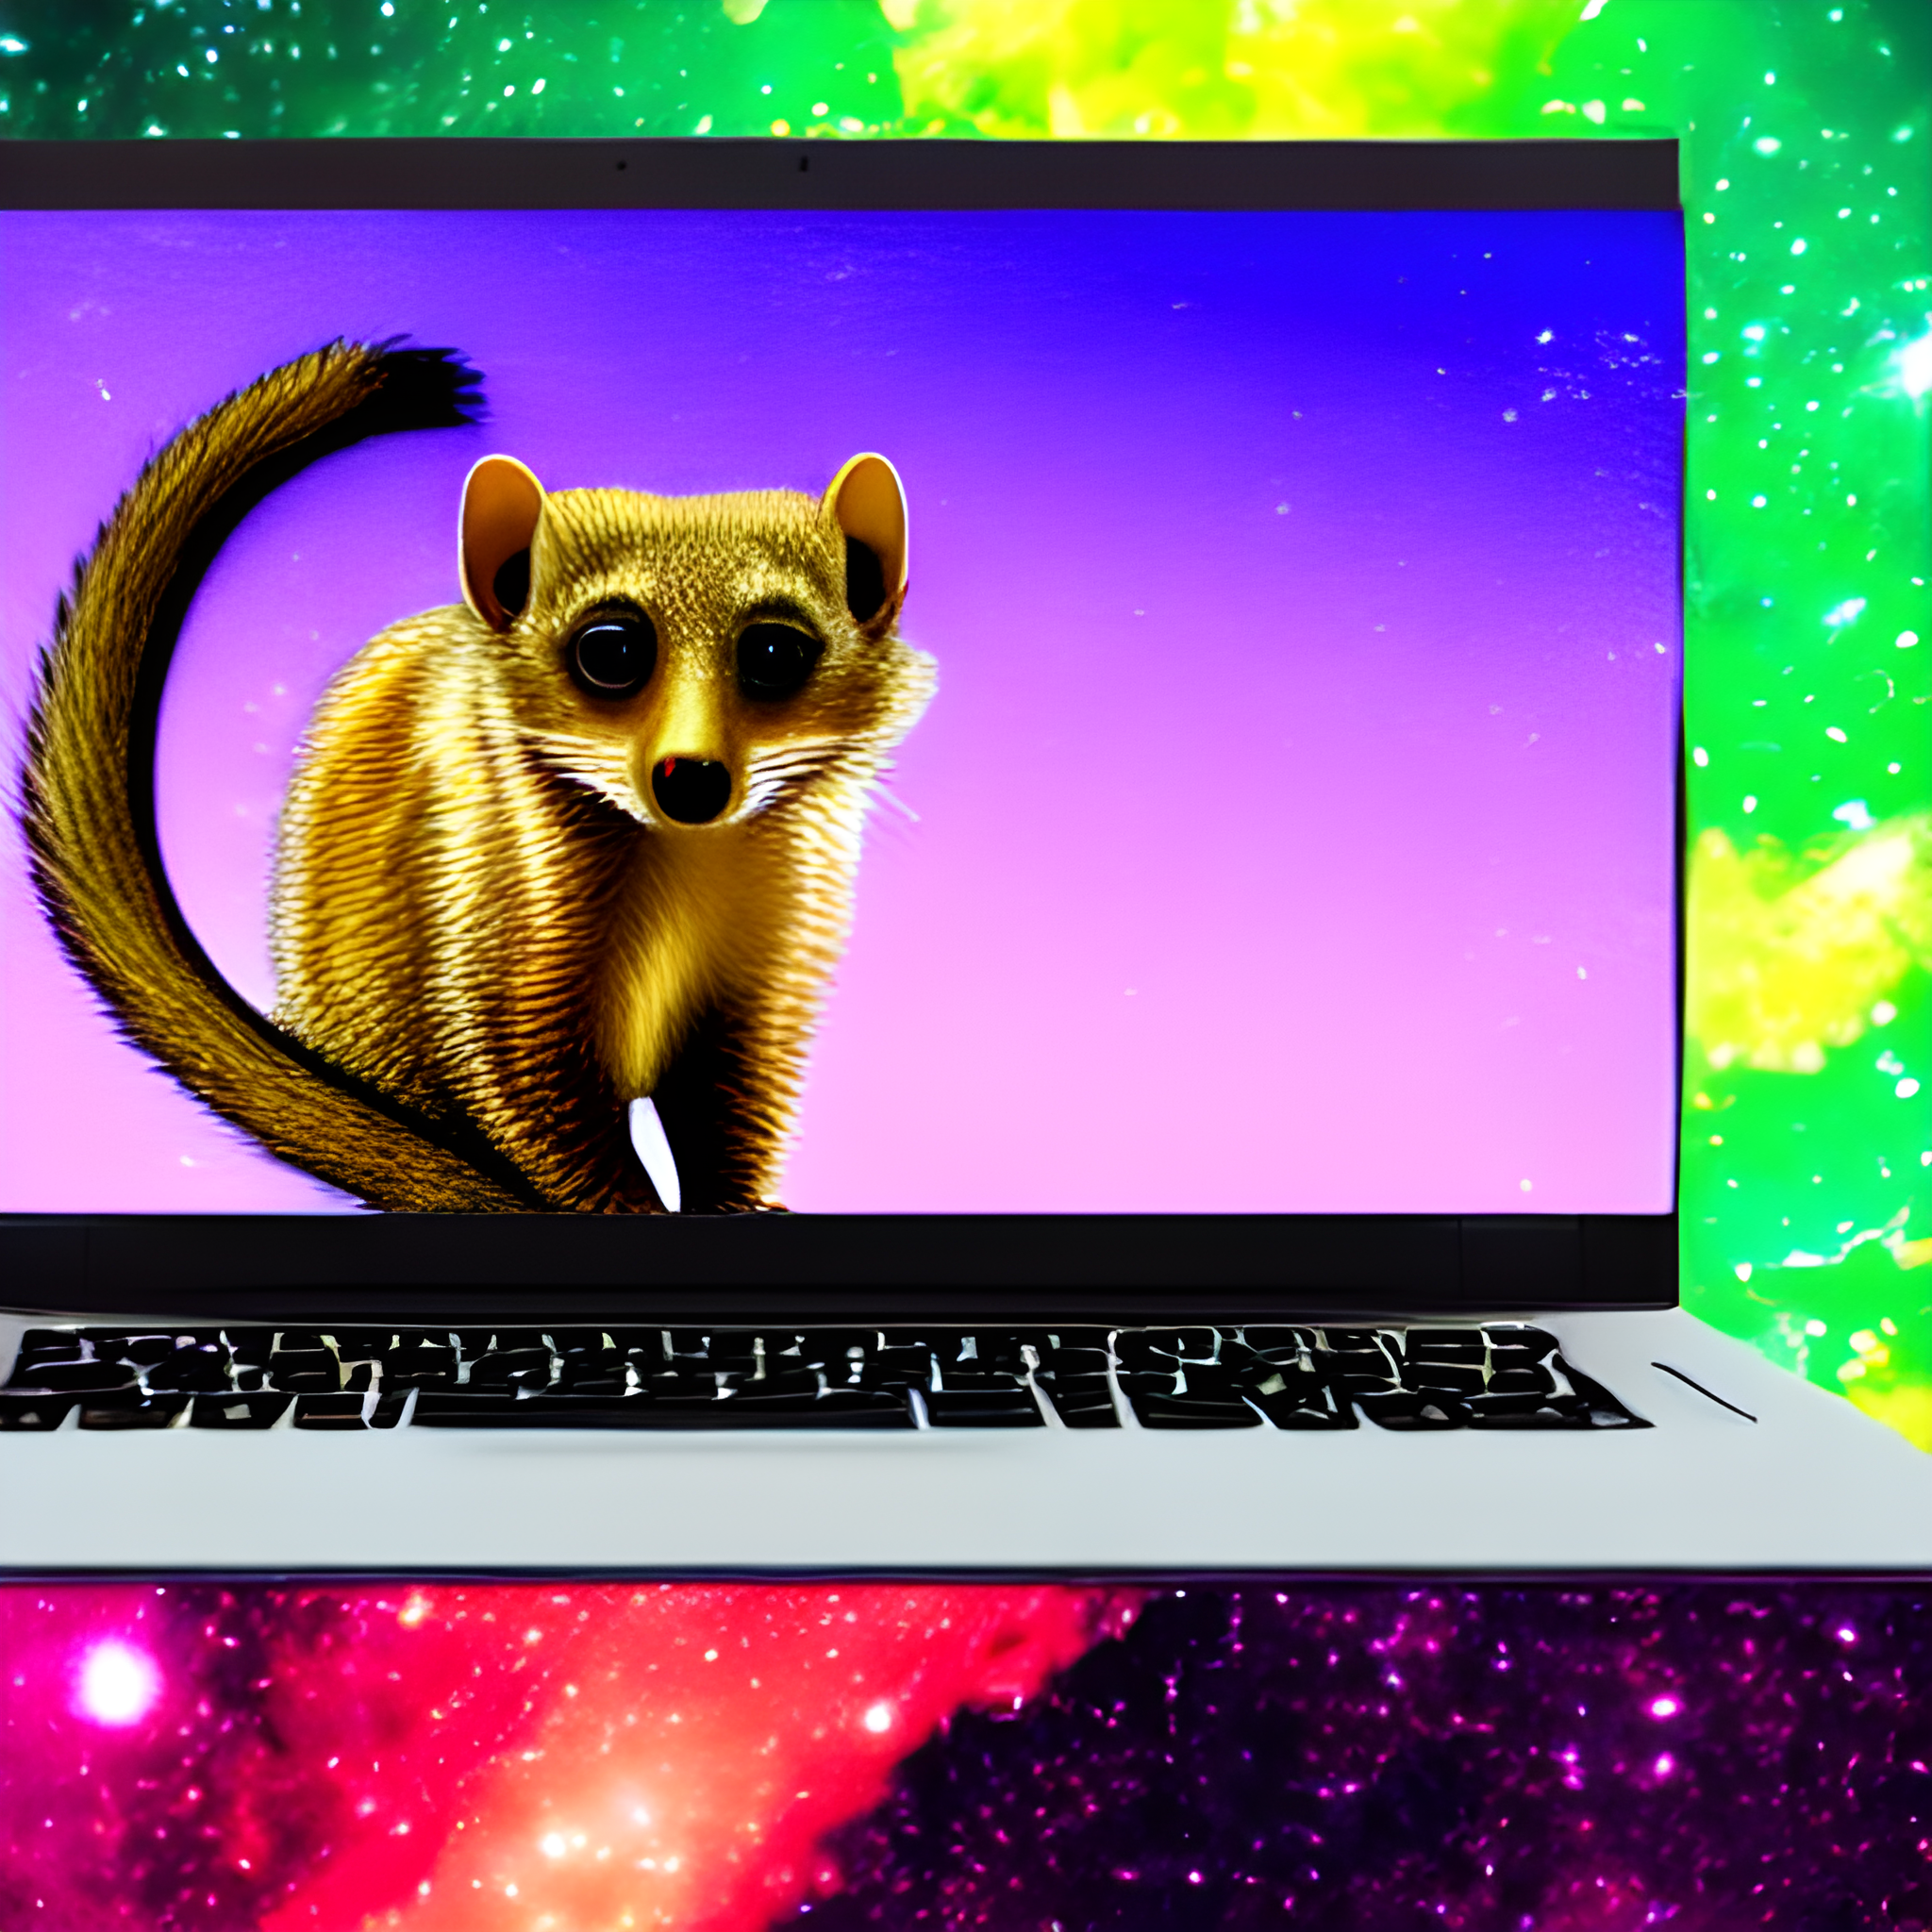 Mongoose on a laptop in space